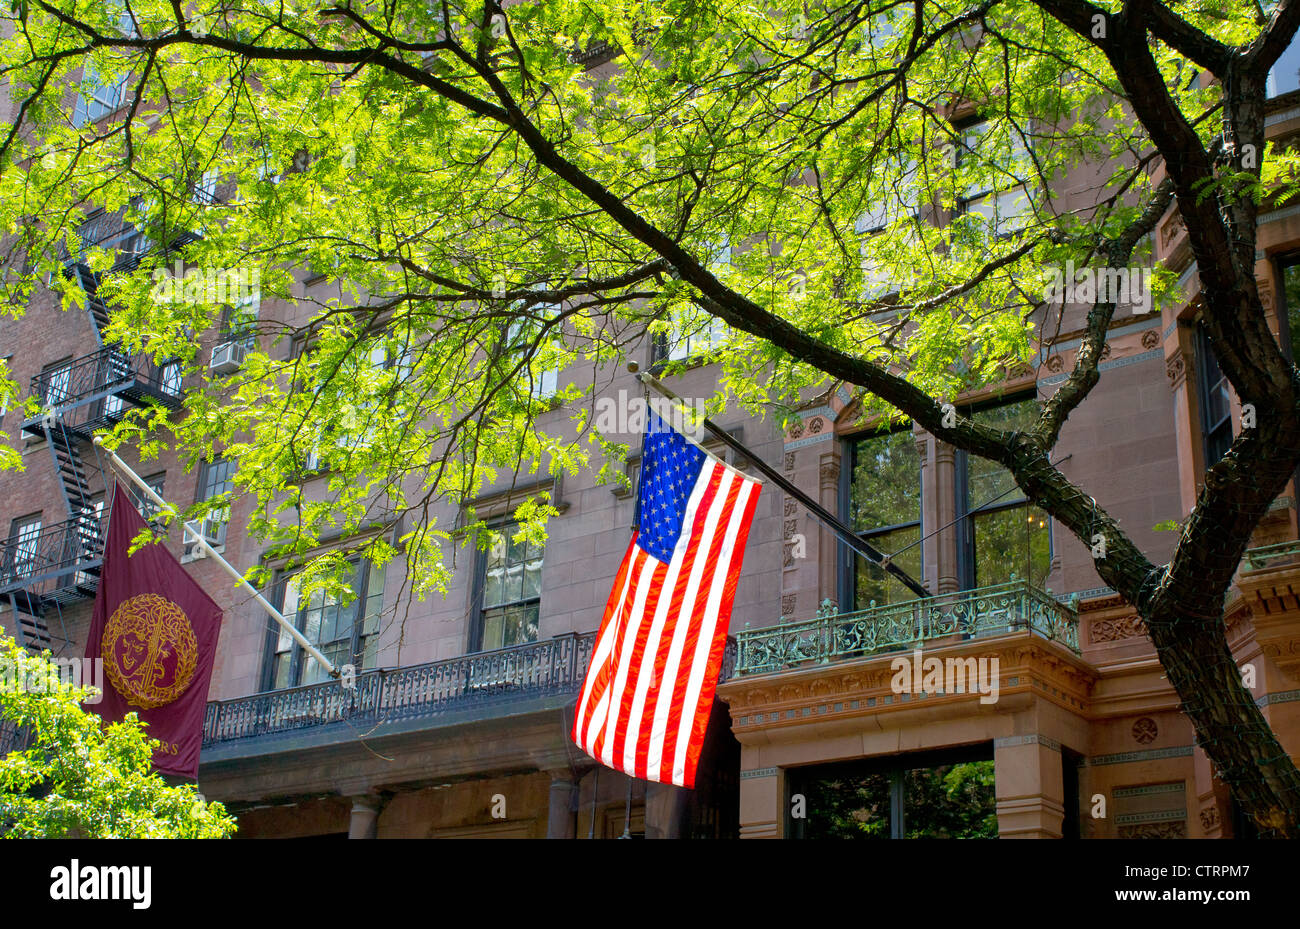 An American flag flies outside the National Arts Club in Gramercy Park, New York City Stock Photo